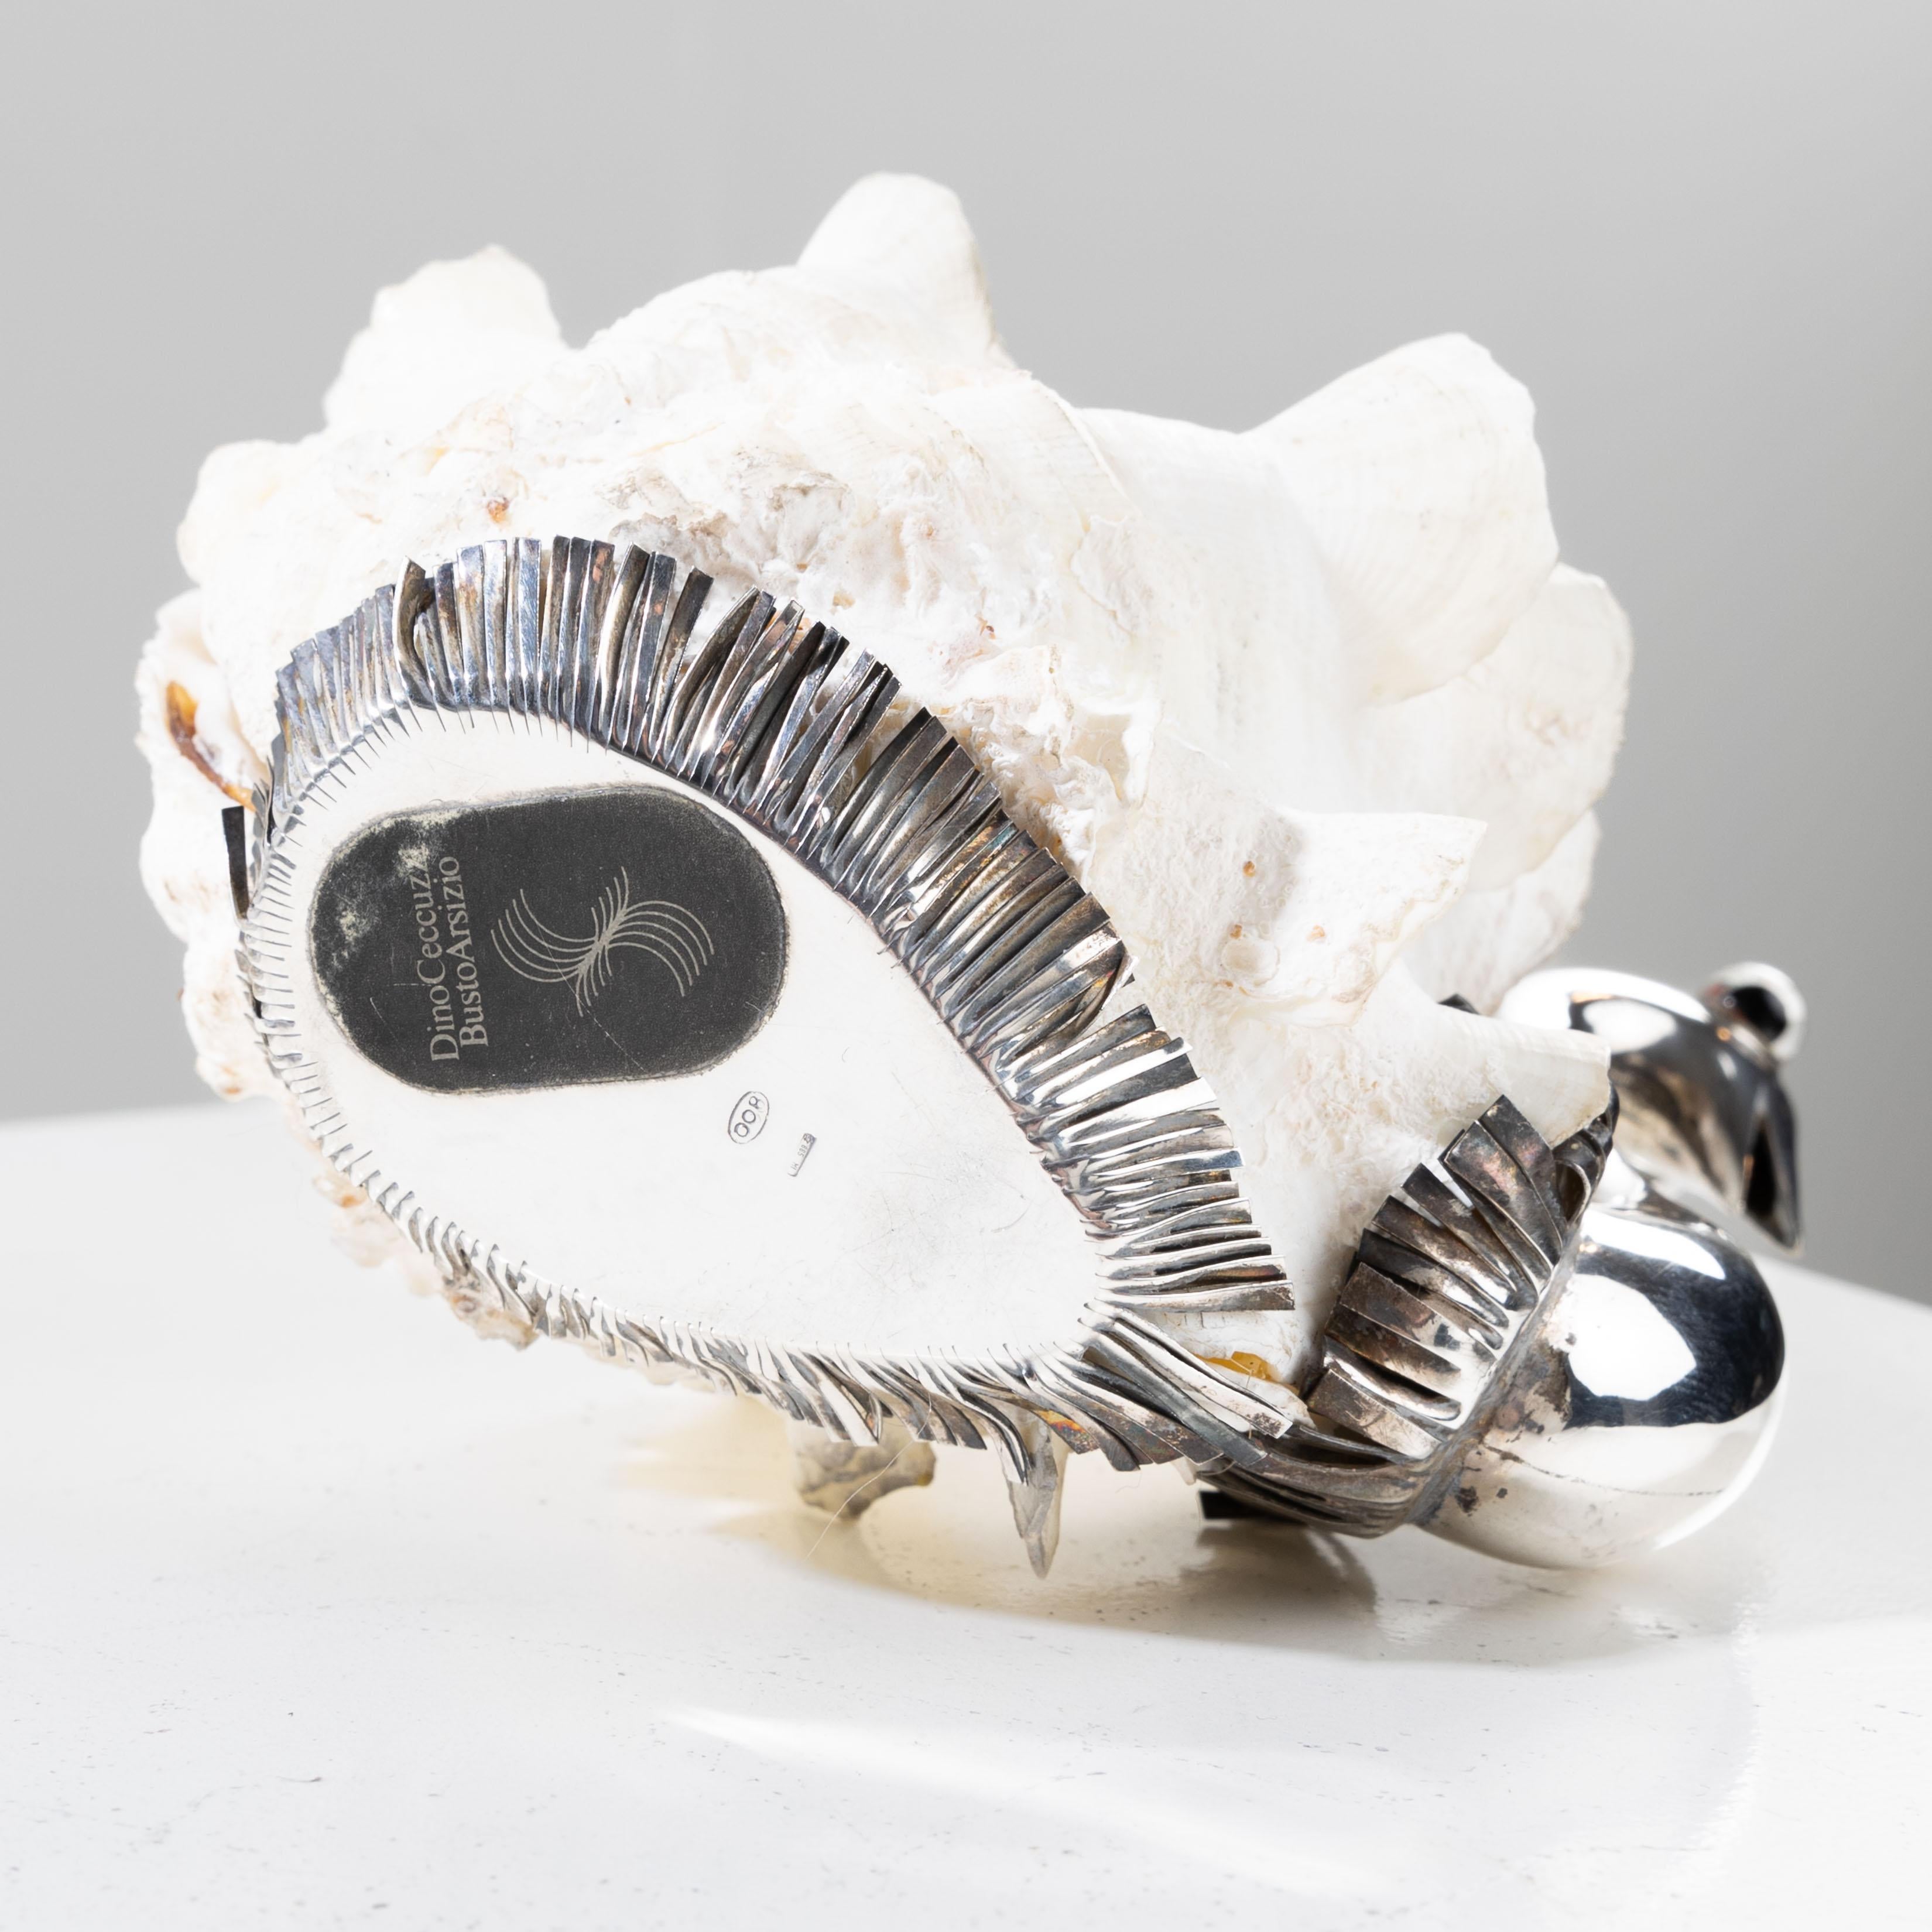 Swan by Gabriele De Vecchi – Silver sculpture mounted on a shell For Sale 2